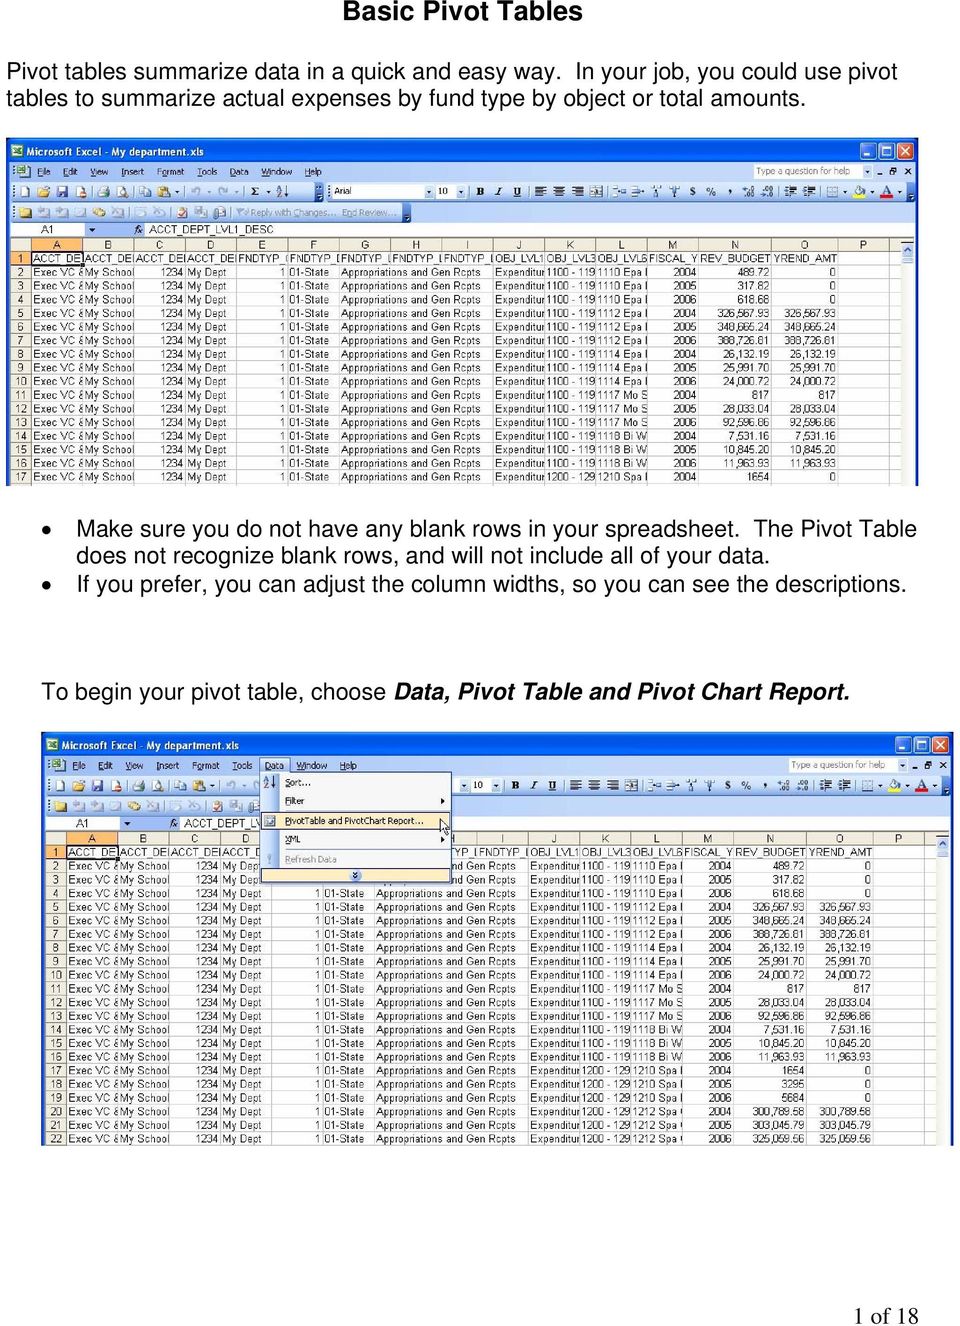 Make sure you do not have any blank rows in your spreadsheet.